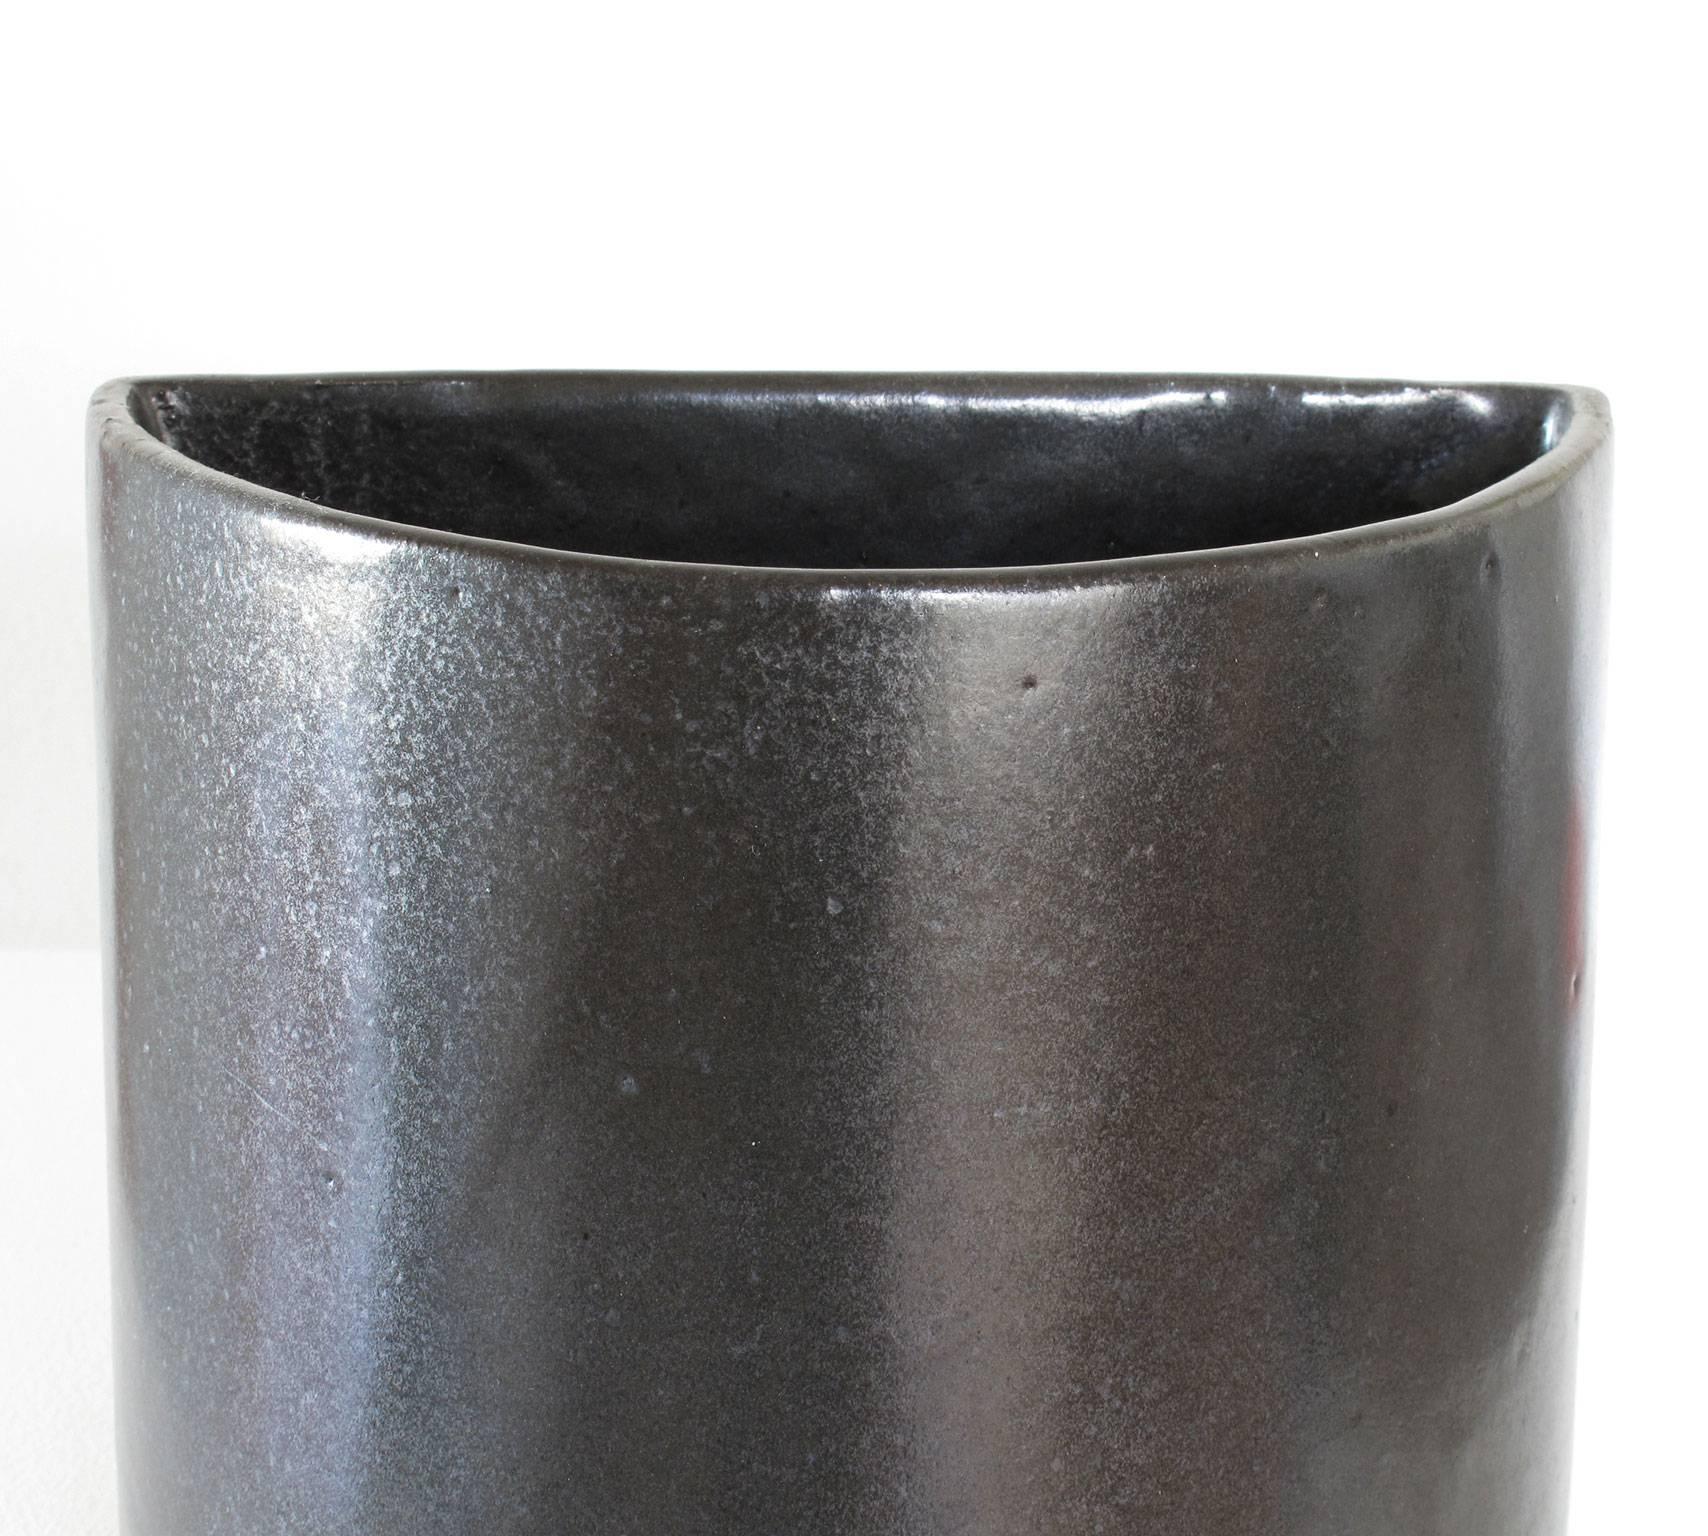 David Cressey Pro Artisan Collection Glazed Black 'Wall Pocket' Ceramic Planter In Excellent Condition For Sale In Los Angeles, CA